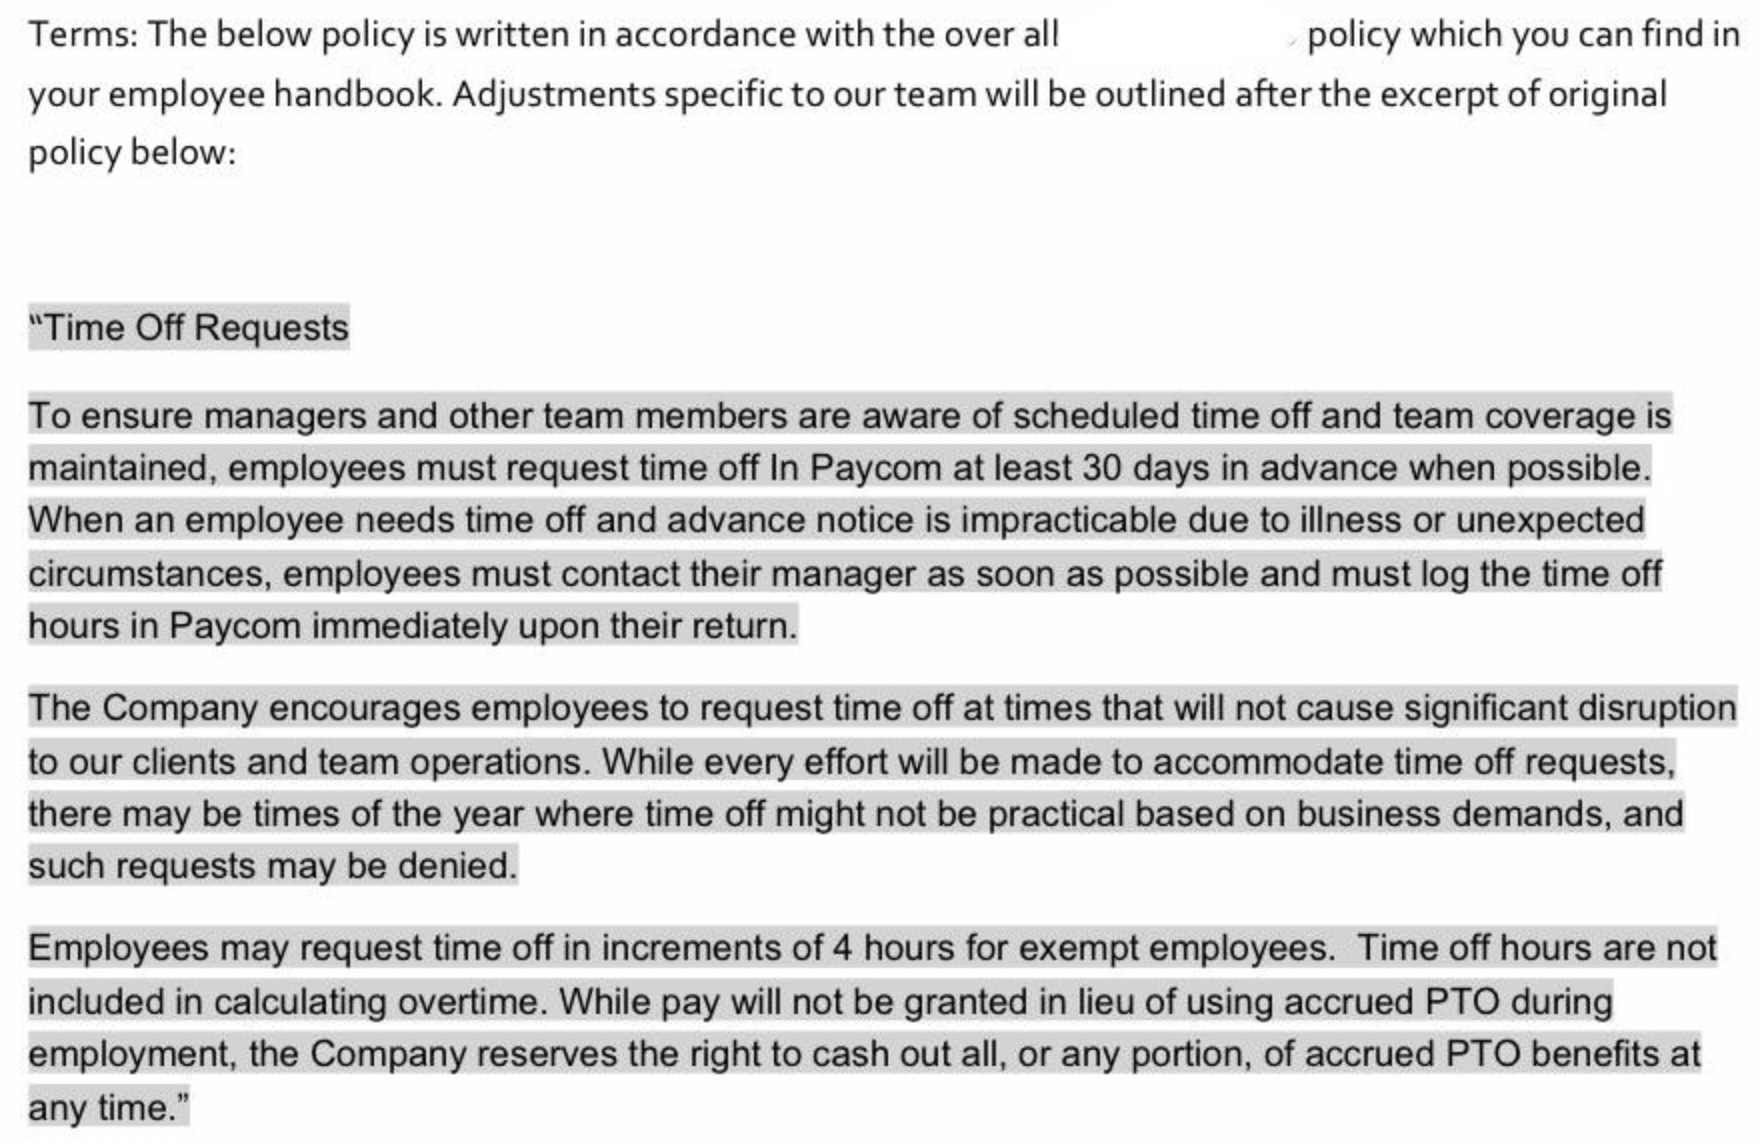 document - Terms The below policy is written in accordance with the over all policy which you can find in your employee handbook. Adjustments specific to our team will be outlined after the excerpt of original policy below "Time Off Requests To ensure man